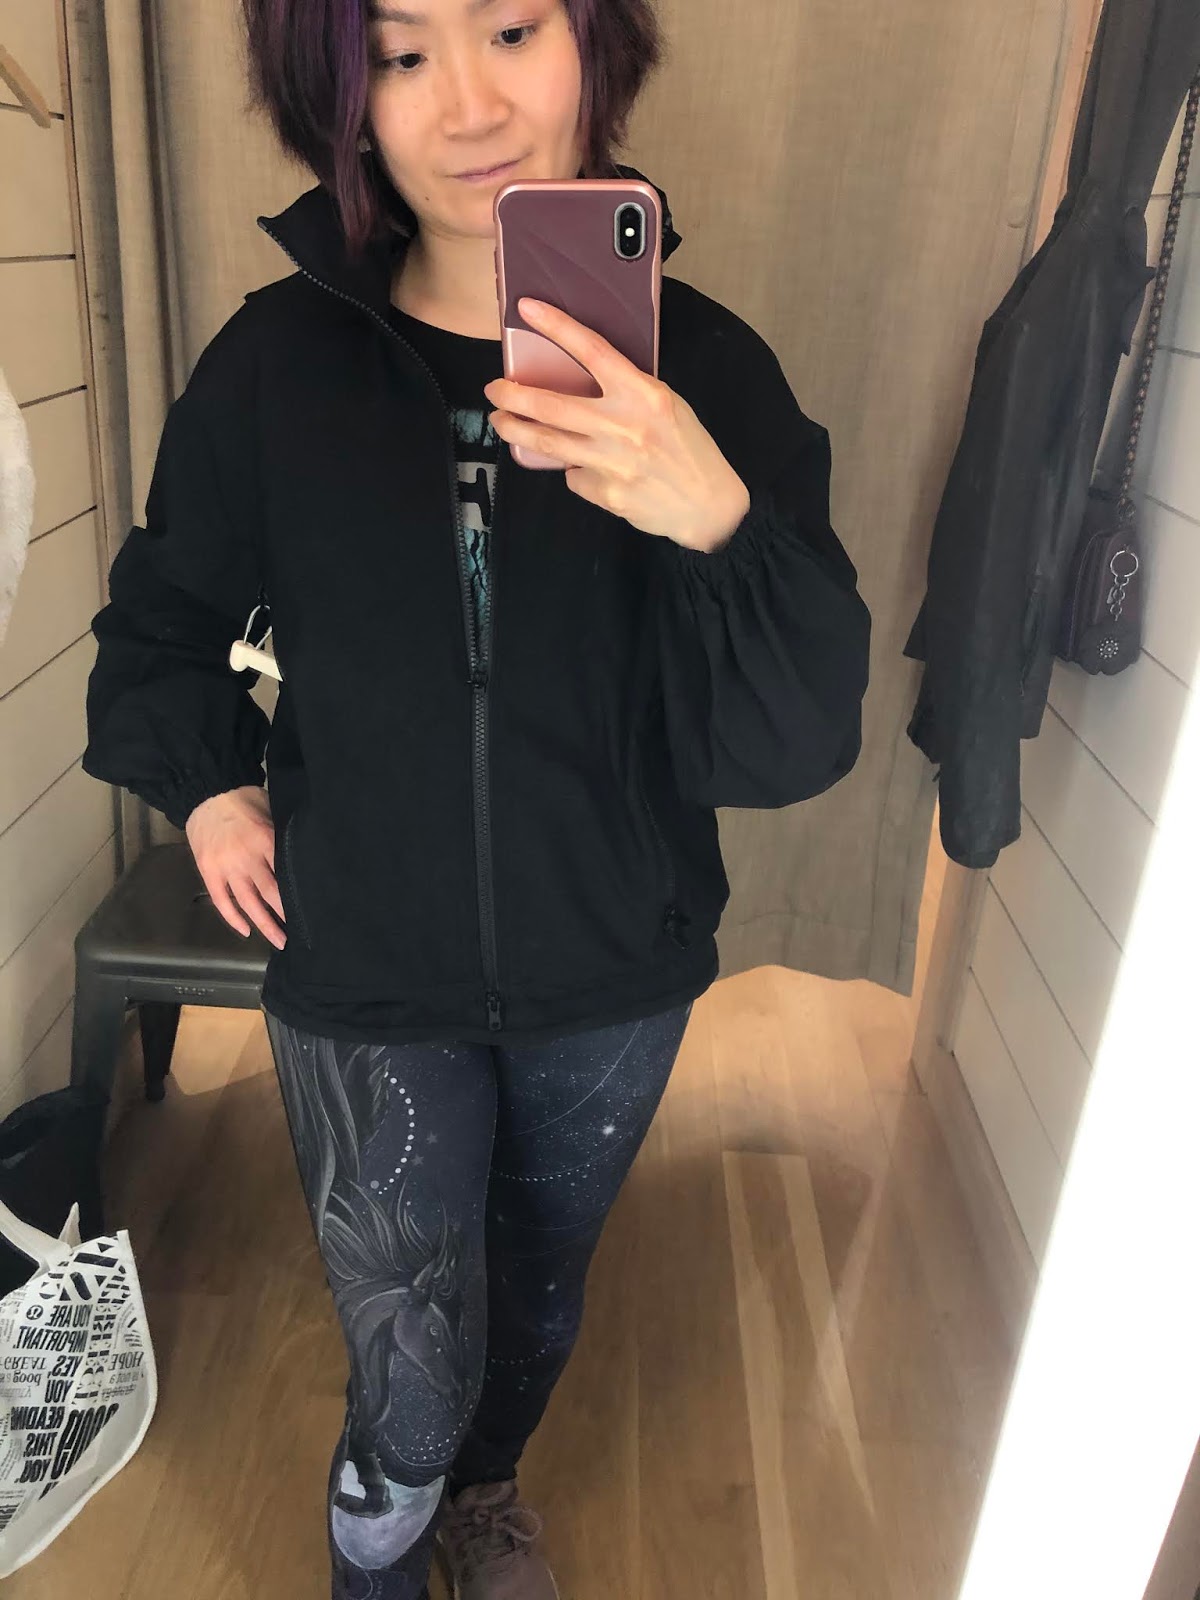 Fit Review Friday! Athleta Triumph Hoodie, Ritual Jacket, Stay Fly